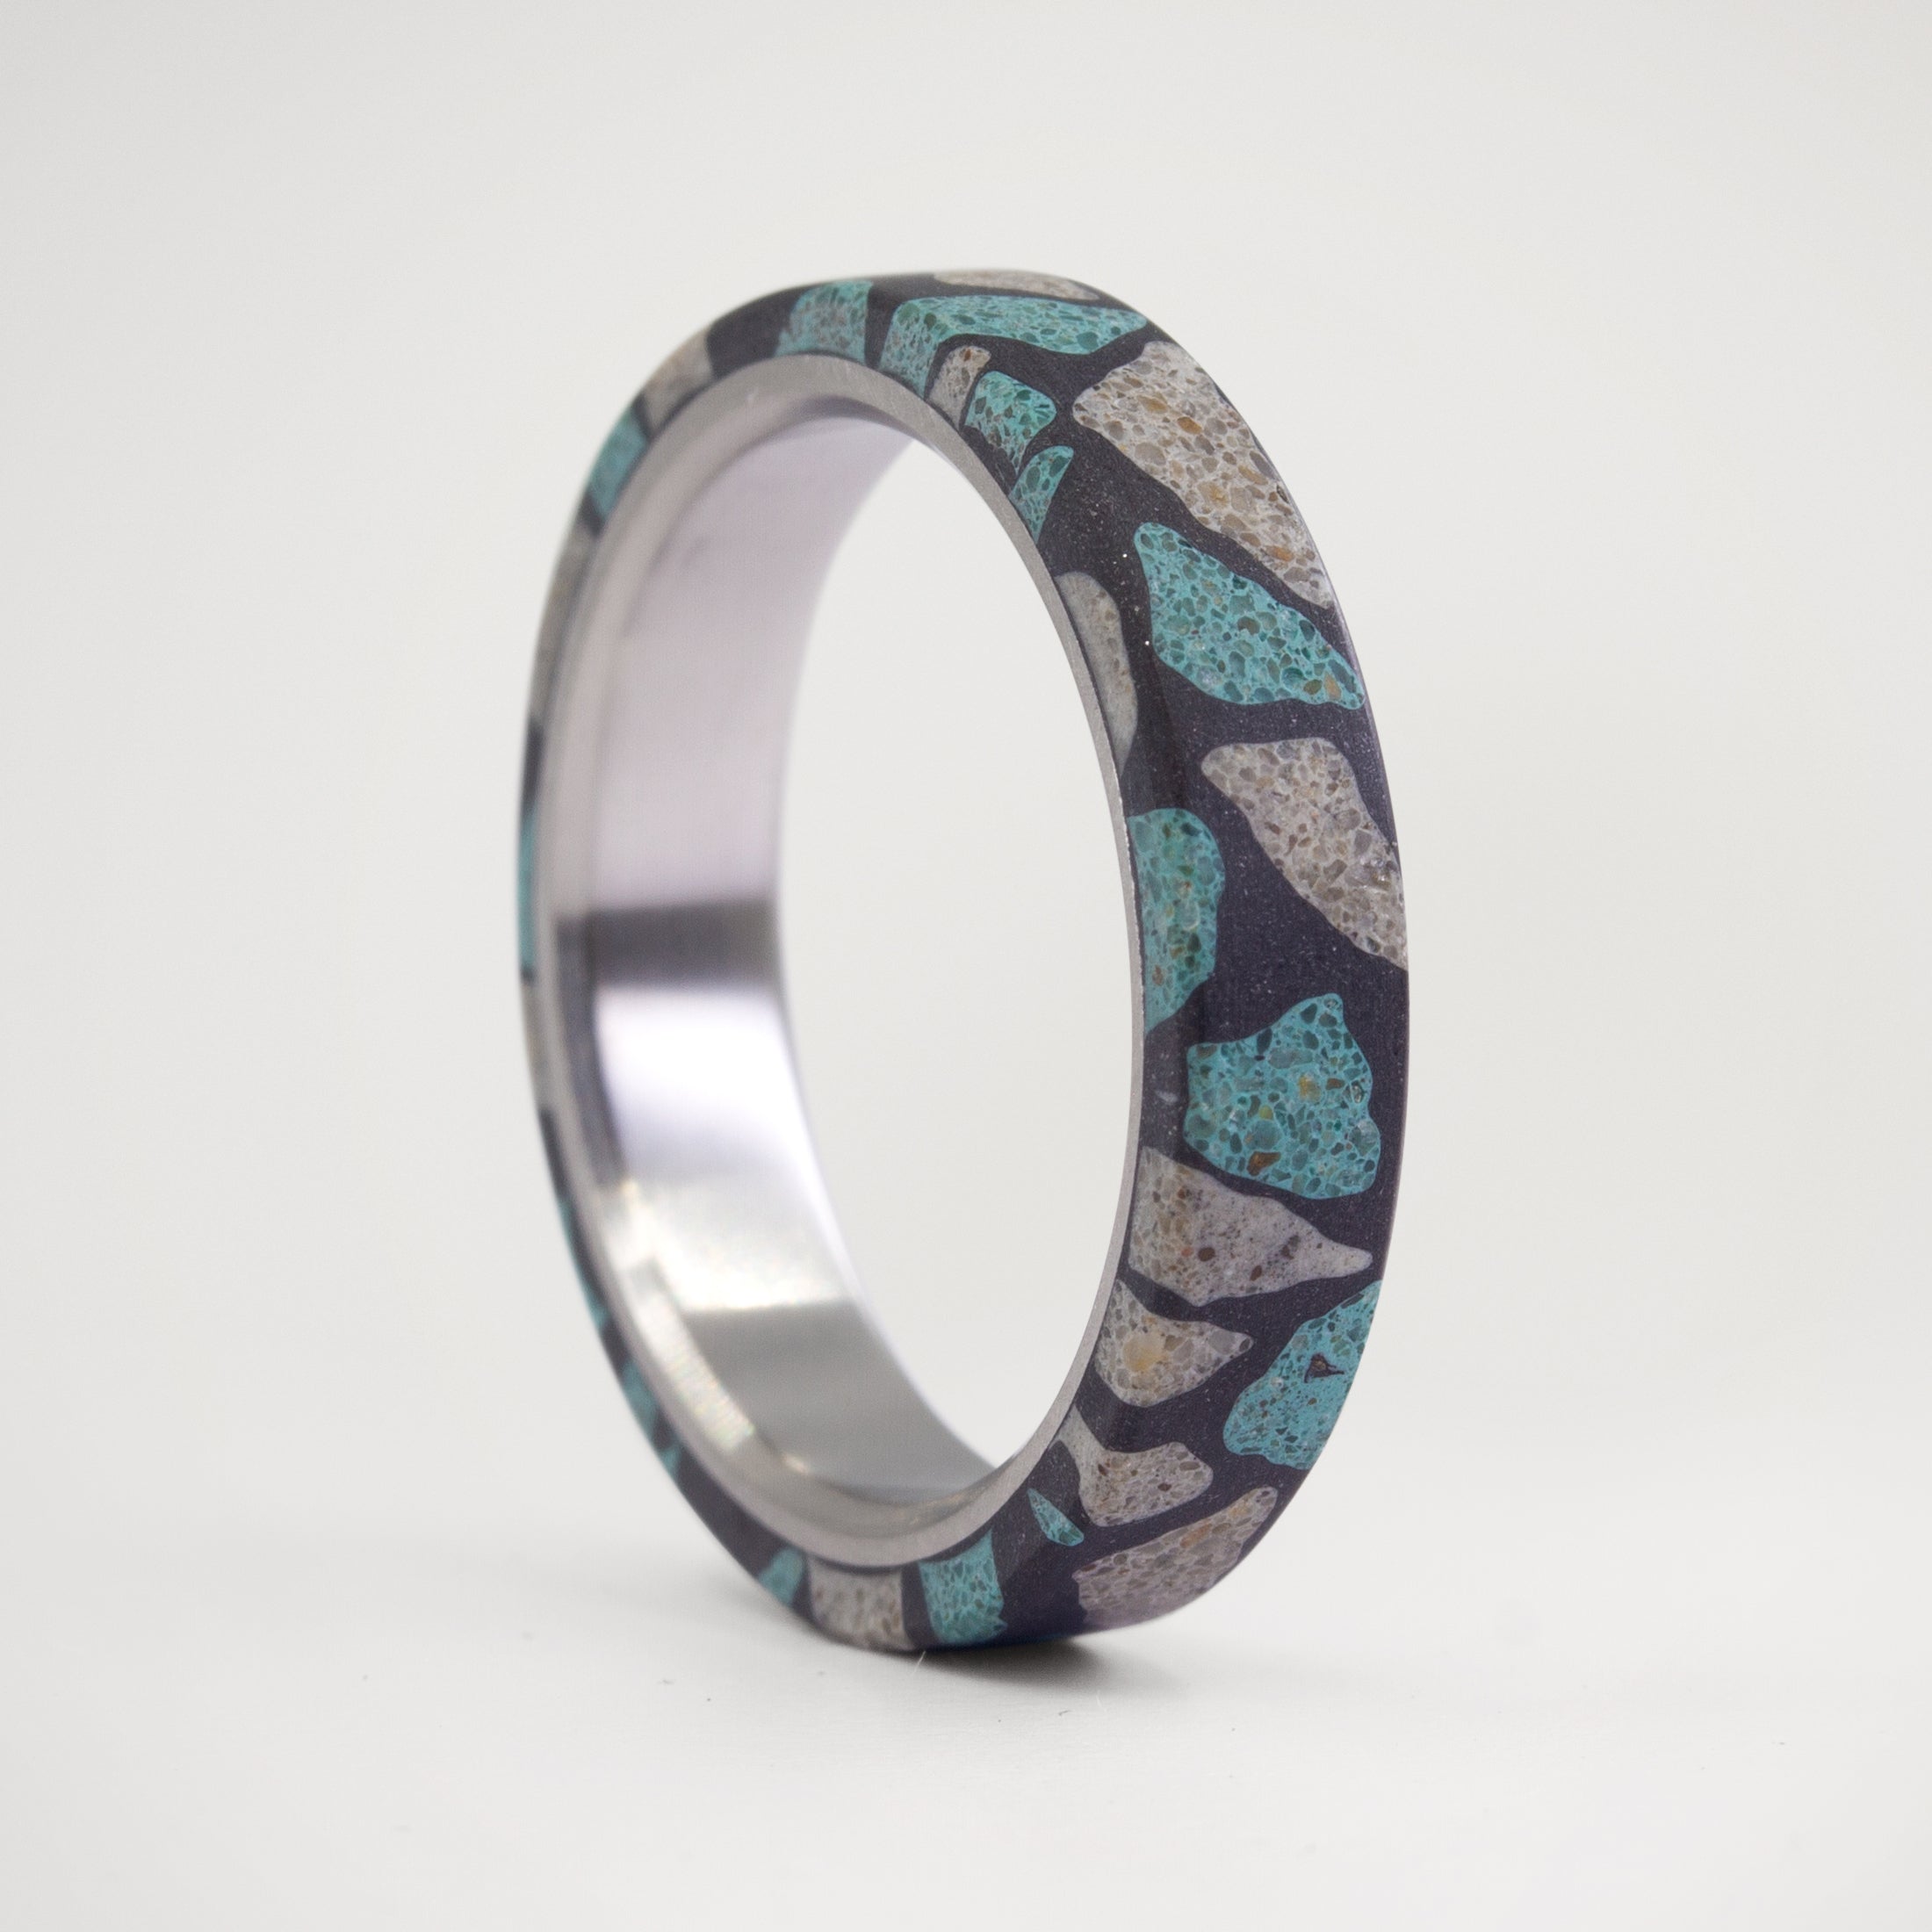 Black, turquoise and grey Terrazzo Ring